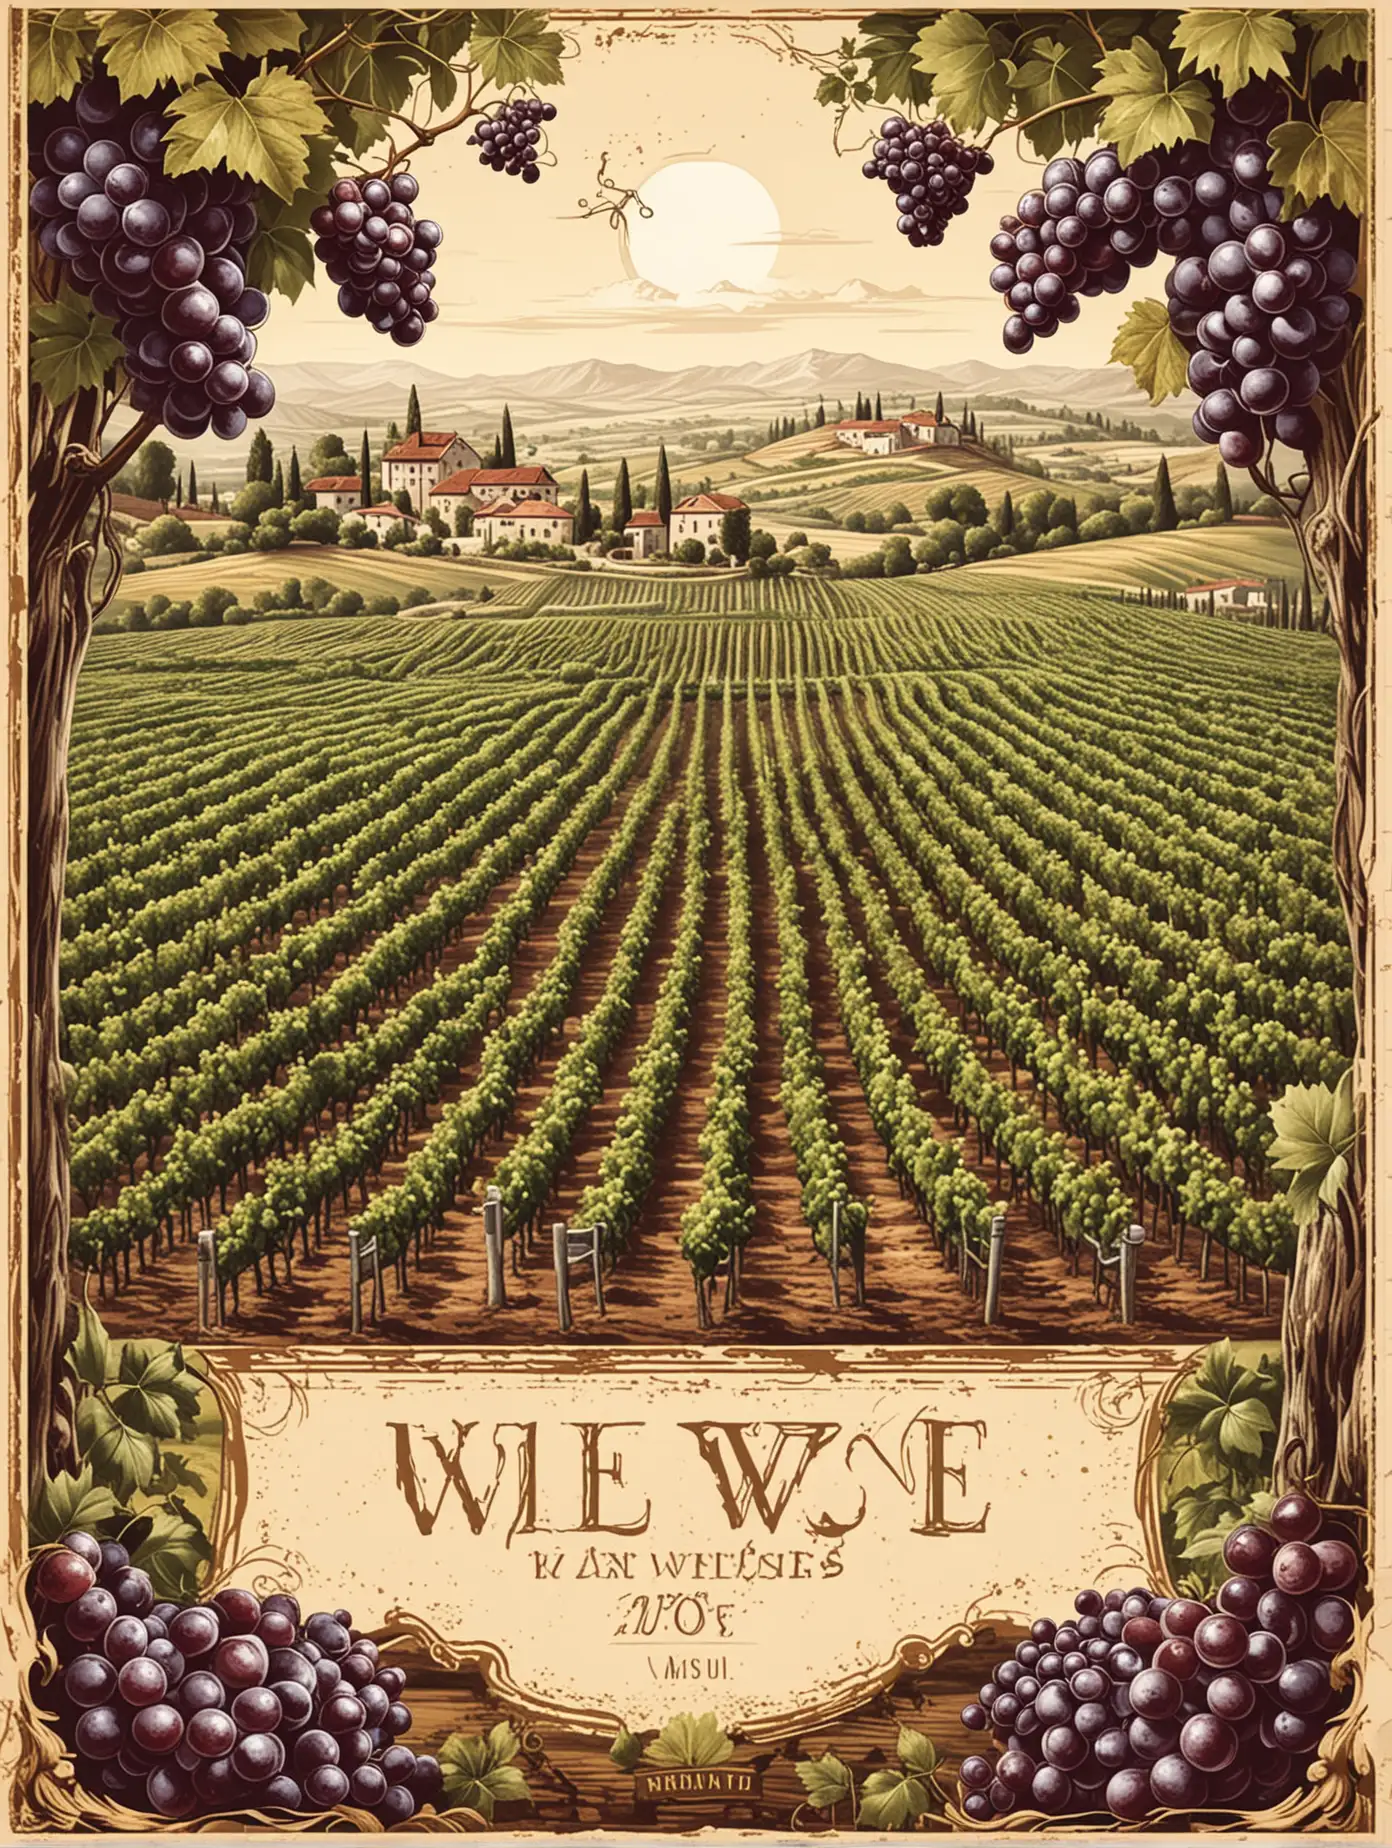 wine label design, no label in the picture, vineyard, grapes and rows of vineyard, 